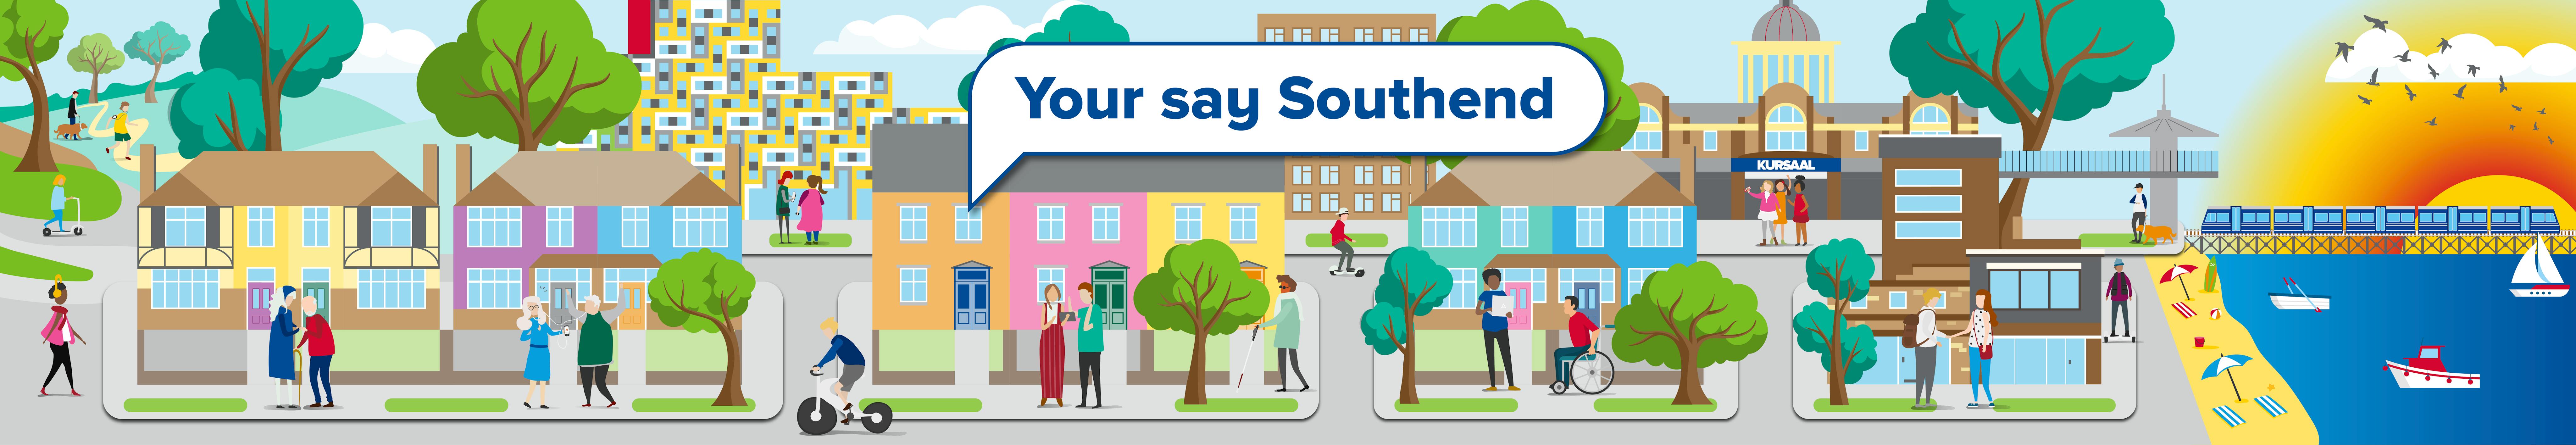 Your say Southend banner,cartoon graphic landscape on Southend with the Kurssal, pier, seaside and residents